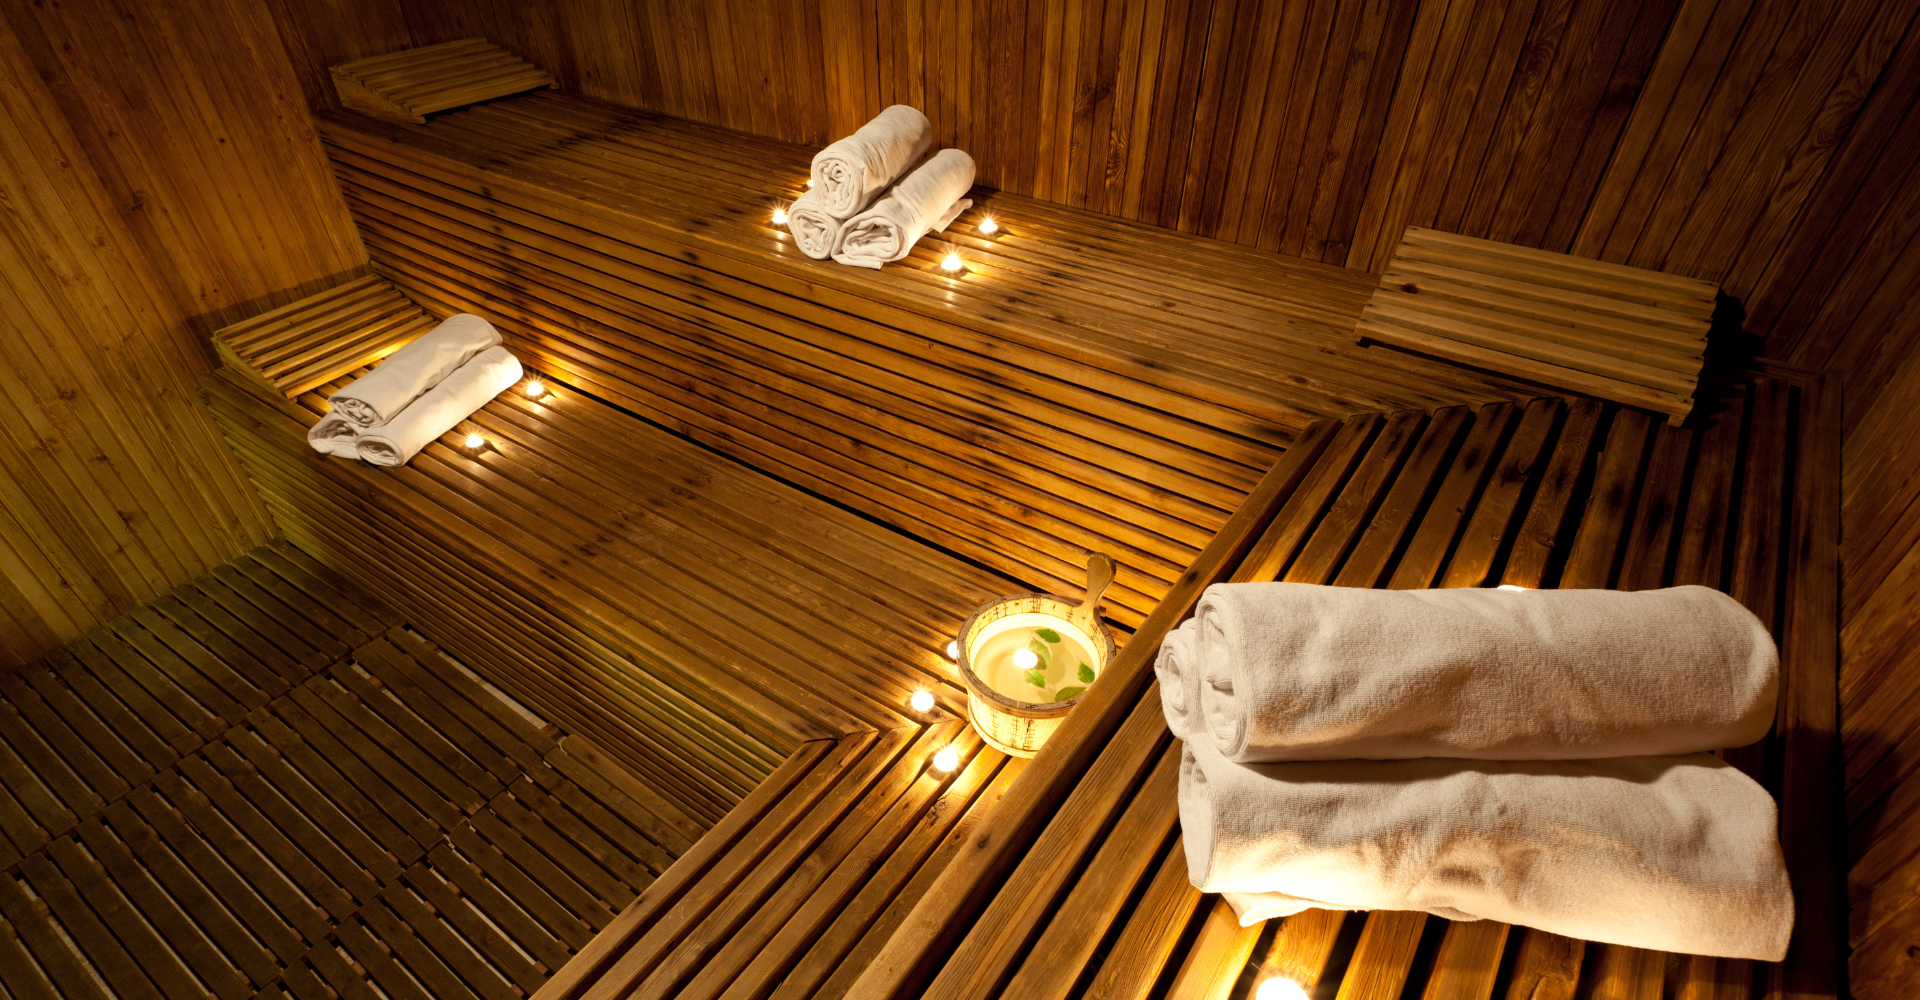 The Endocrine Effects of Repeated Sauna Bathing on Testosterone Levels